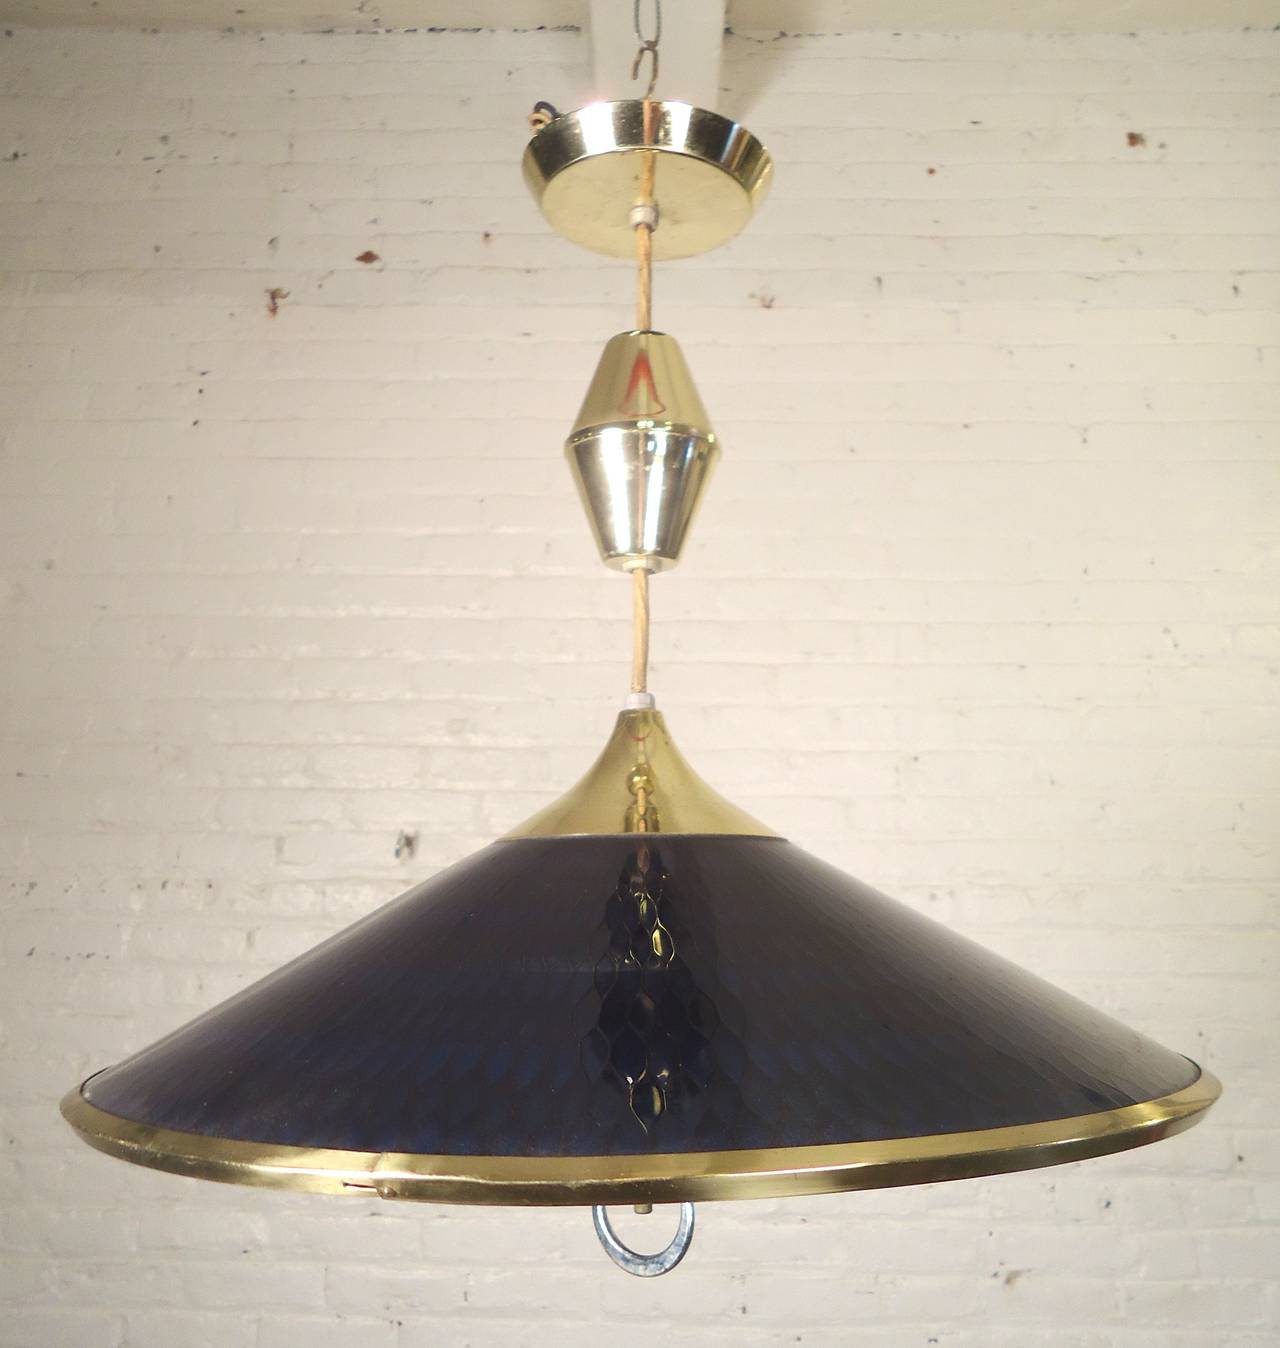 Mid-century modern hanging lamp with vivid coloring. Colored lucite with brass tint hardware. The deep blue and green mosaic dome are beautiful when illuminated.

(Please confirm item location - NY or NJ - with dealer)